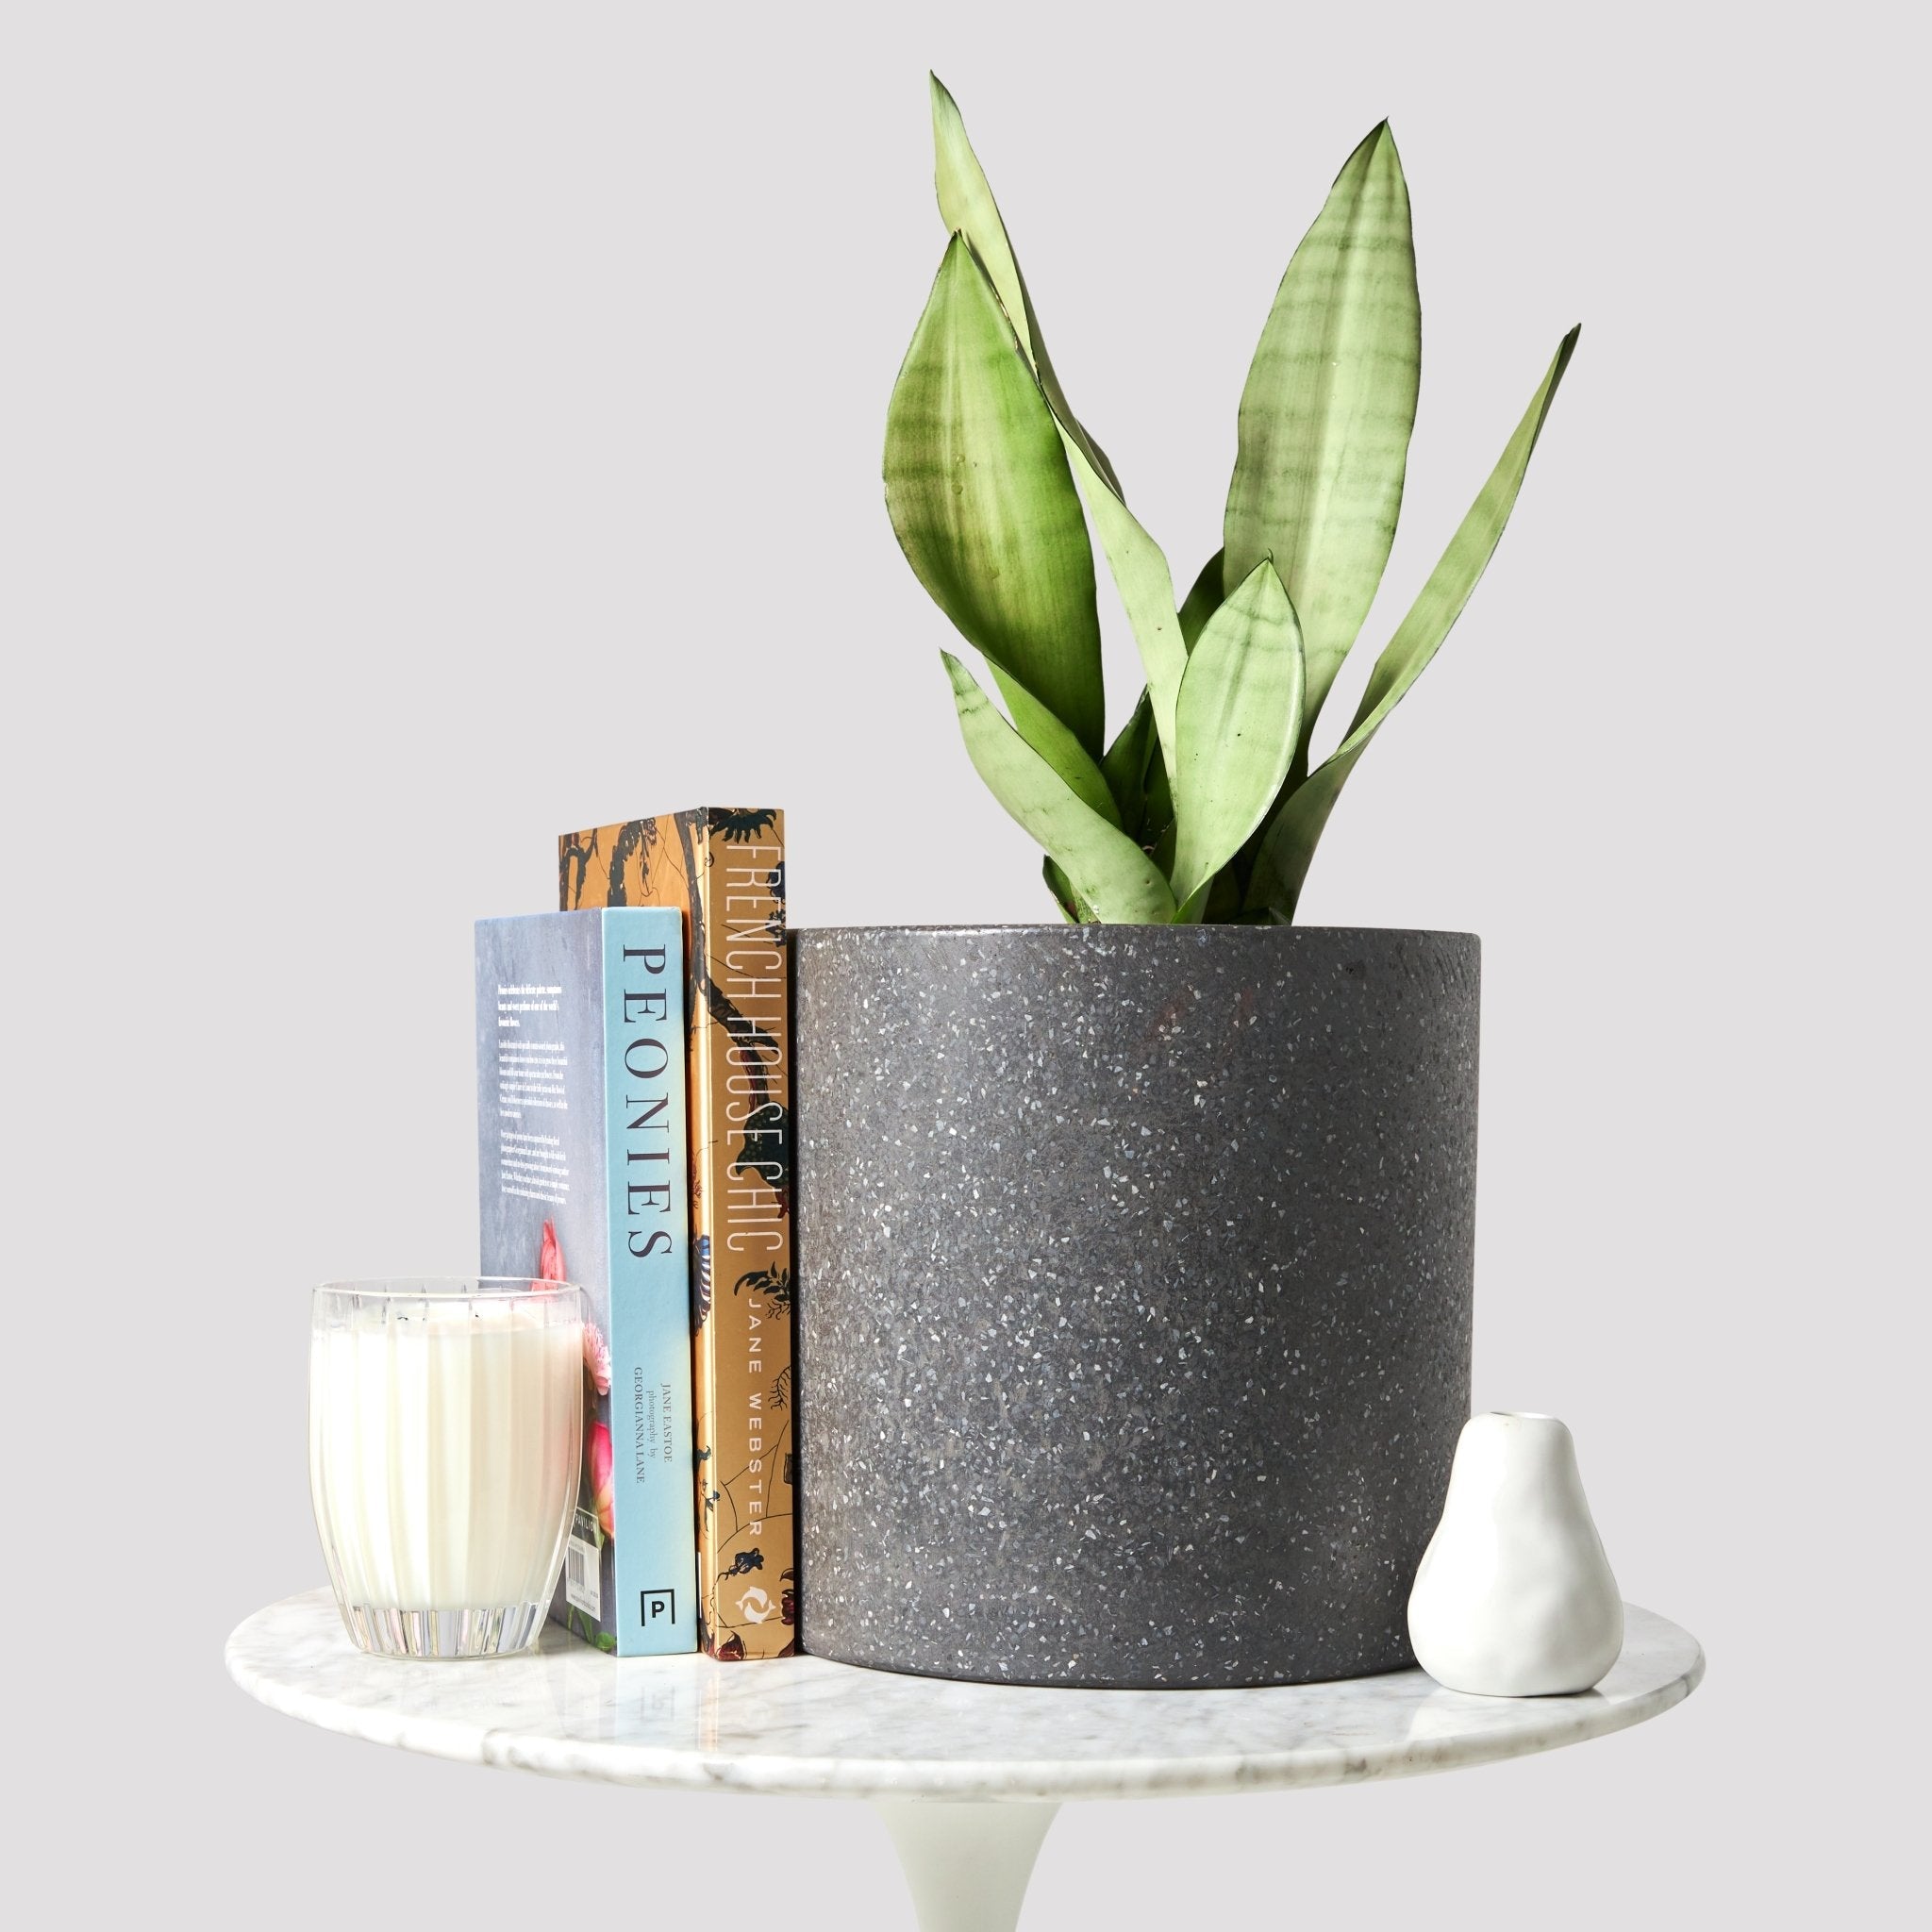 Sansevieria Moonshine Indoor Plant in Jardin Black Pot on Table The Good Plant Co